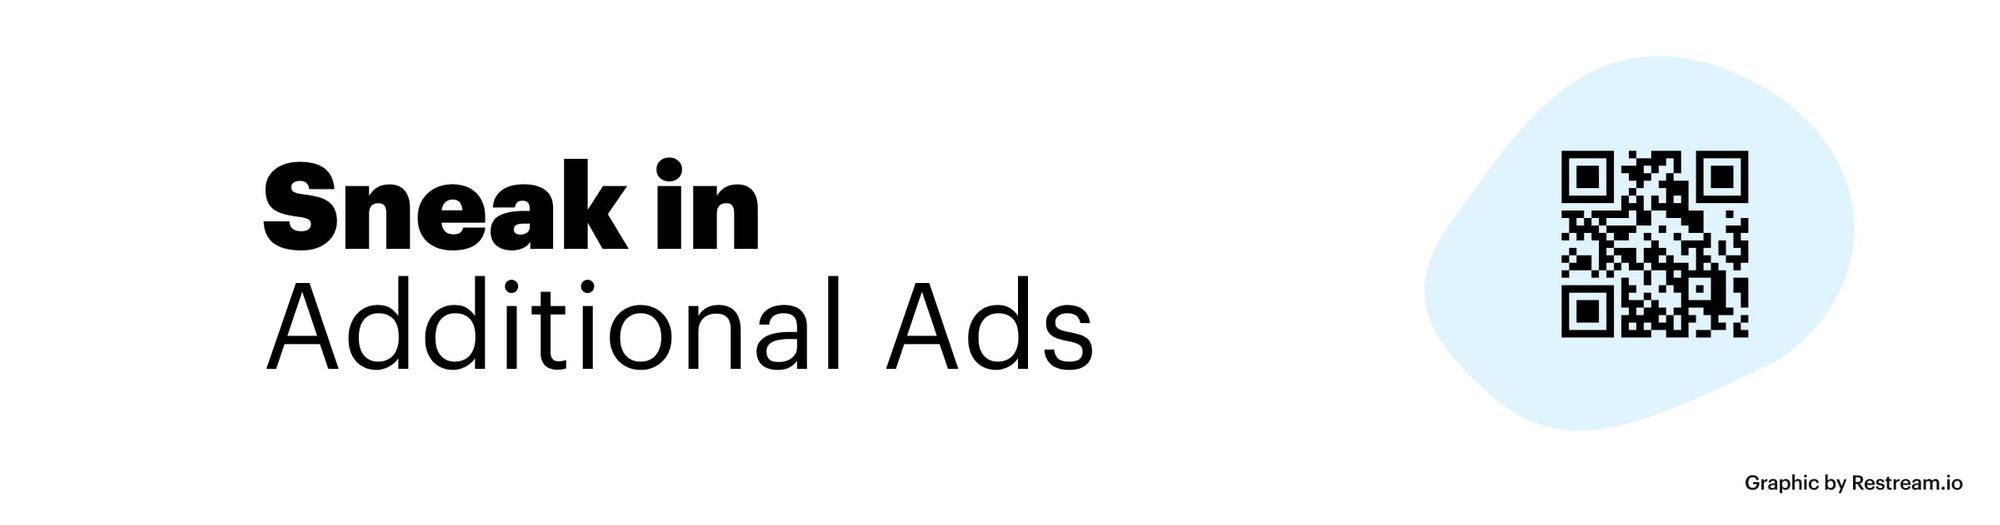 Sneak in additional ads